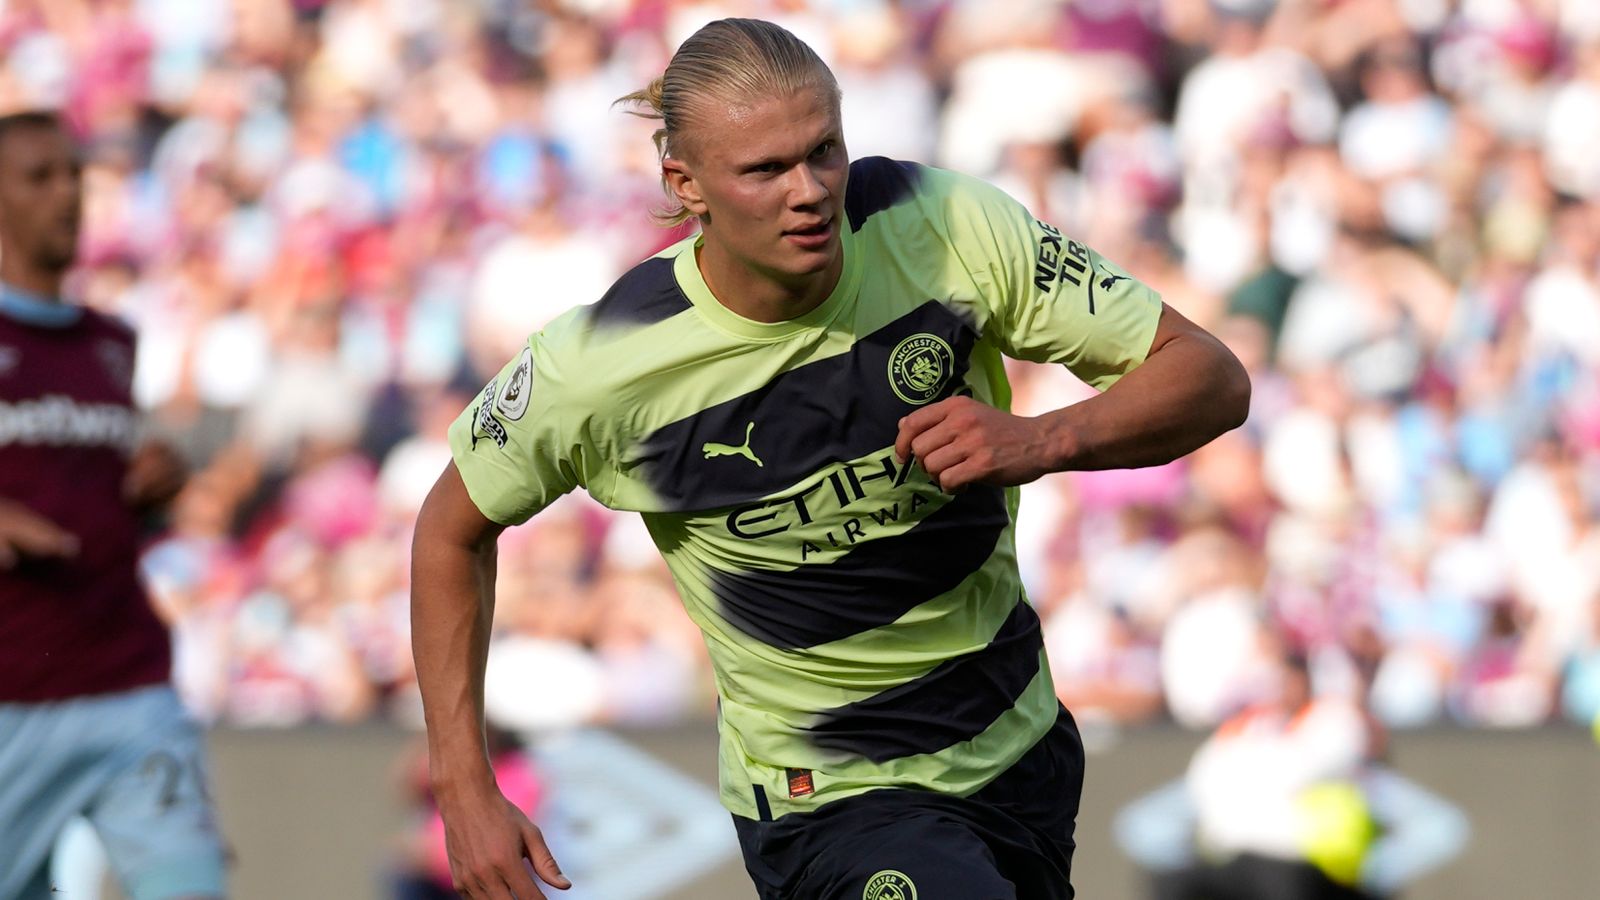 Erling Haaland: Man City’s new striker ‘unplayable’ as he announces himself in style against West Ham